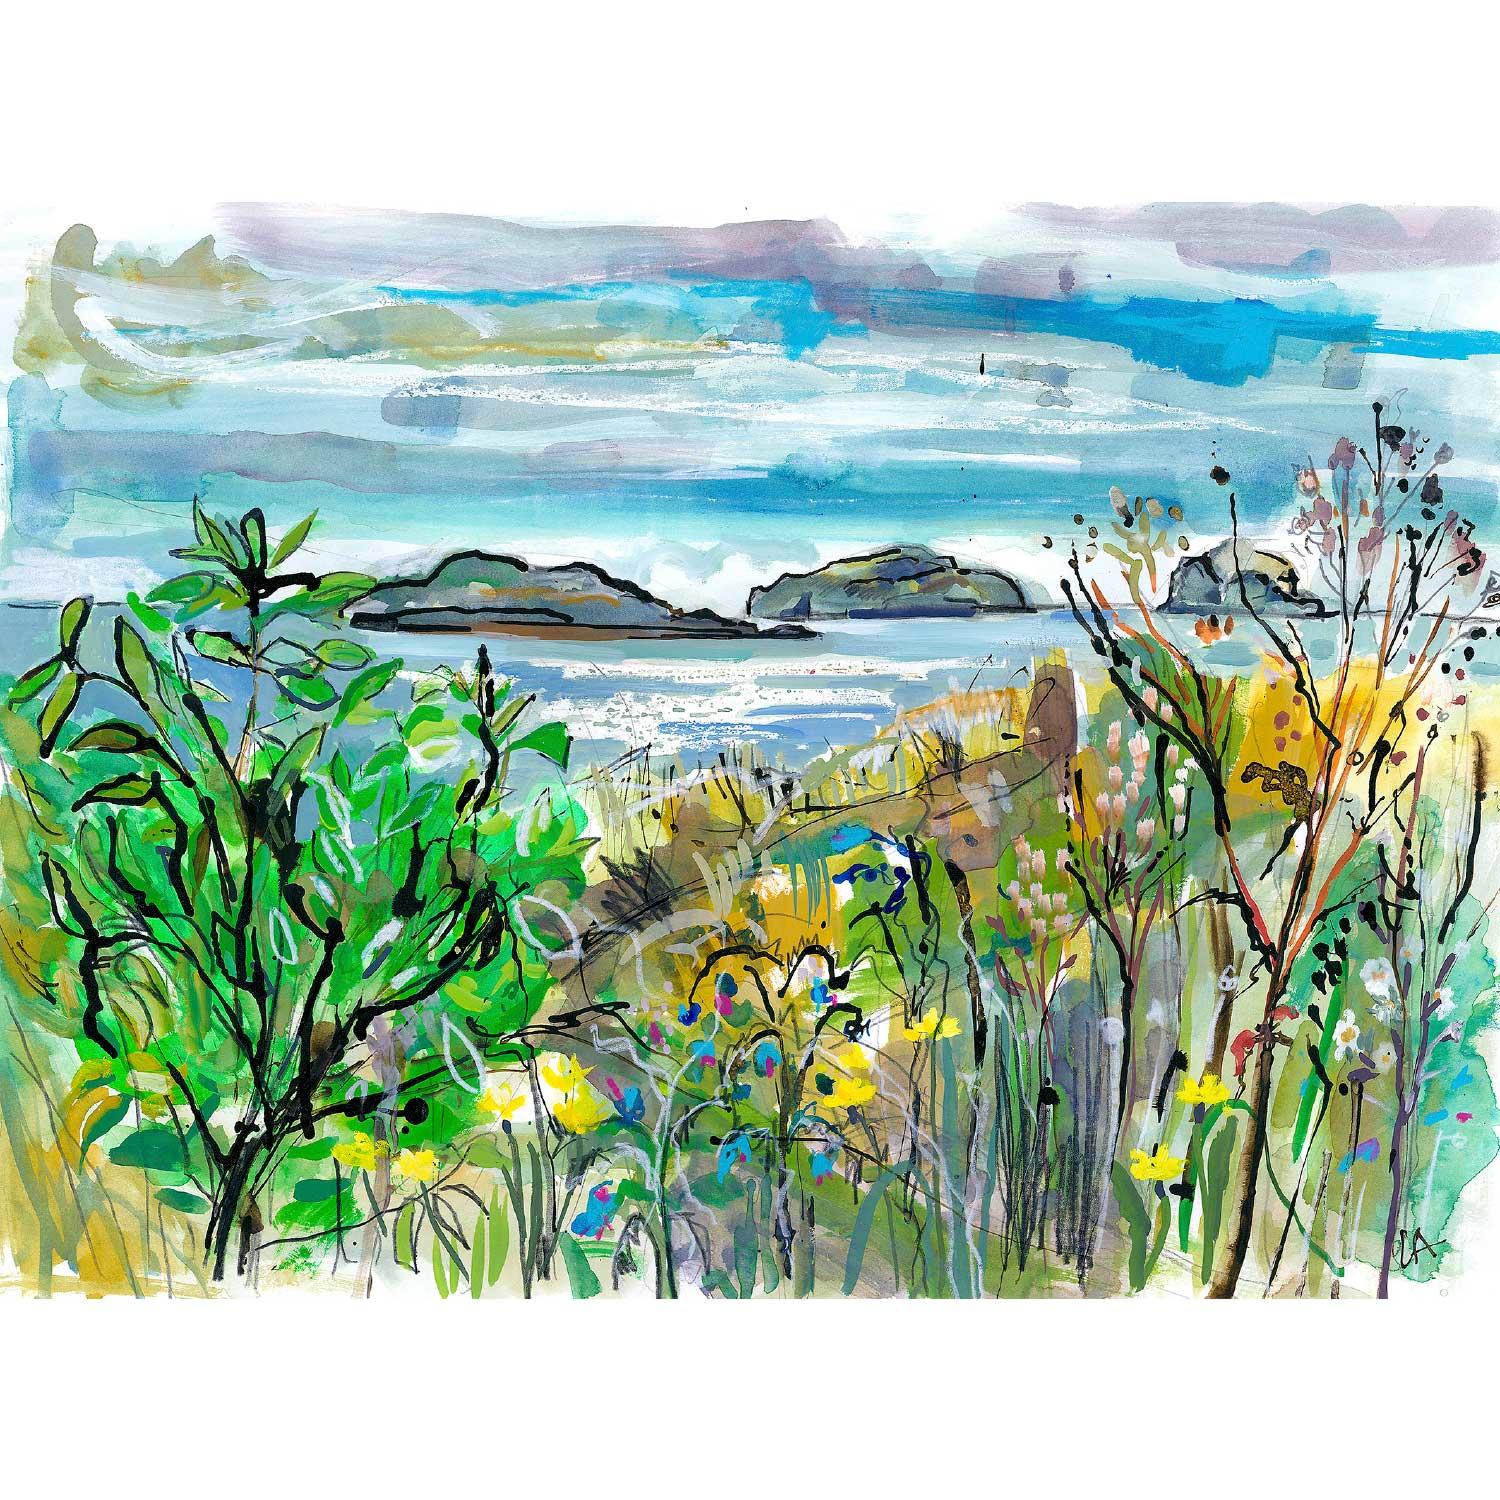 Yellowcraigs Beach, The Lamb, Craigleith Islands and the Bass Rock by Clare Arbuthnott